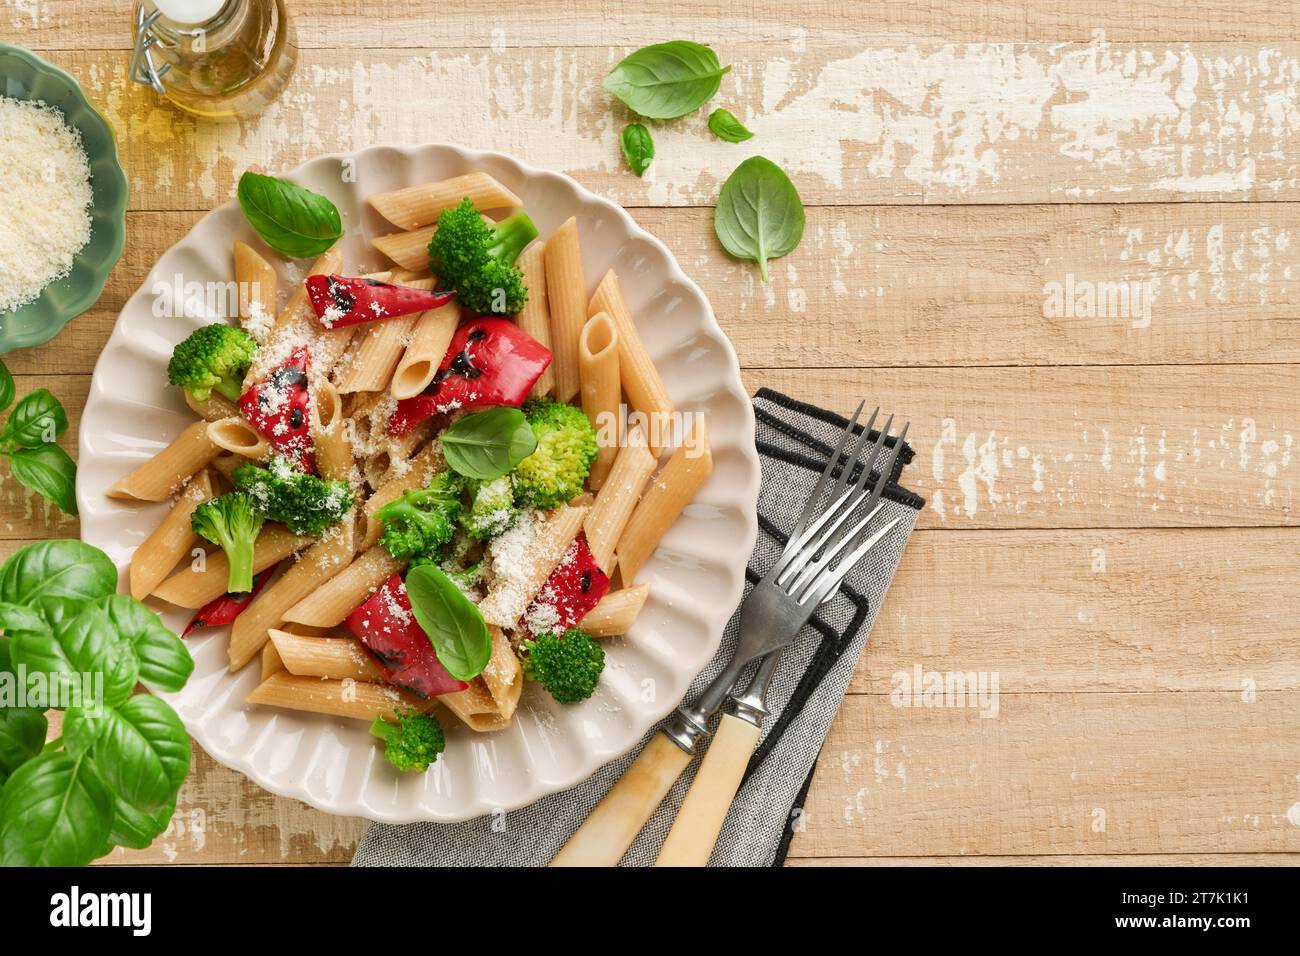 Wholegrain pasta penne with broccoli and red grilled bell pepper and on light wooden rustic background table. Vegan pasta. Traditional Italian cuisine Stock Photo